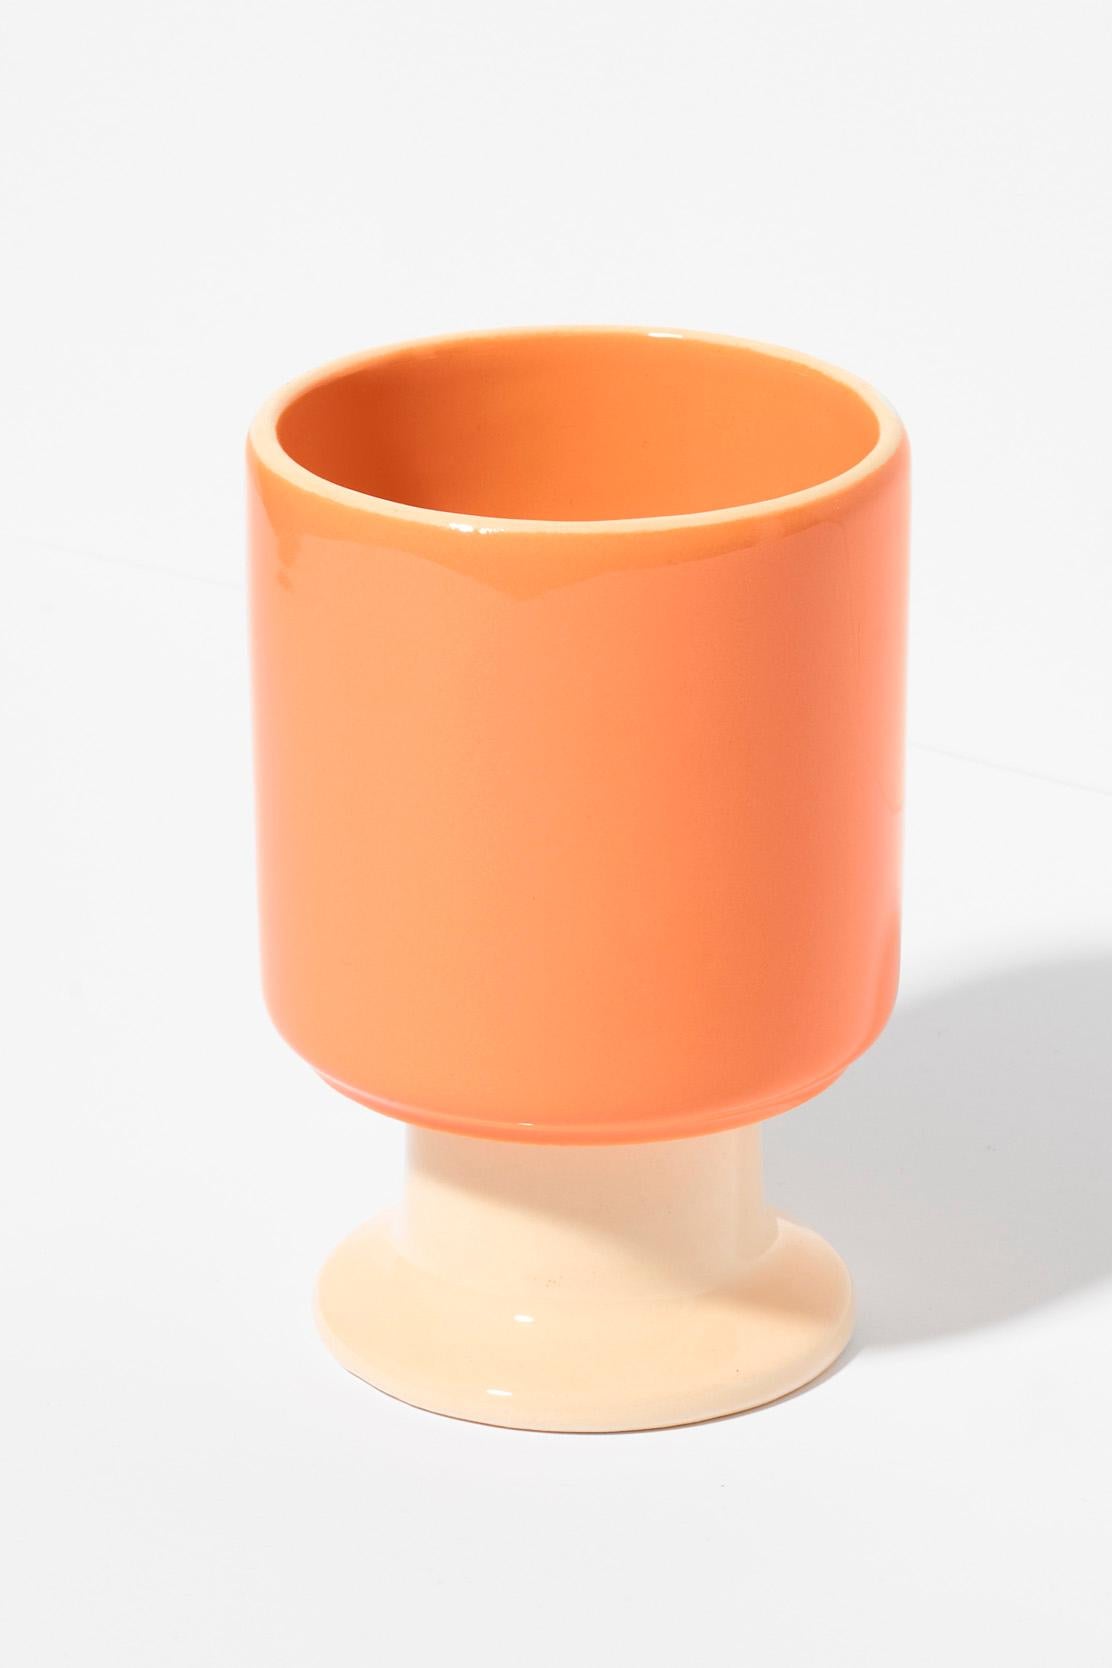 The WIT cup is a multifunctional vessel with a playful stem. It can become your favorite coffee cup, a dessert bowl, a container for pens, or other favorite accessories. WIT chalices can be stacked to create stable towers, making storage easy.

Dia.